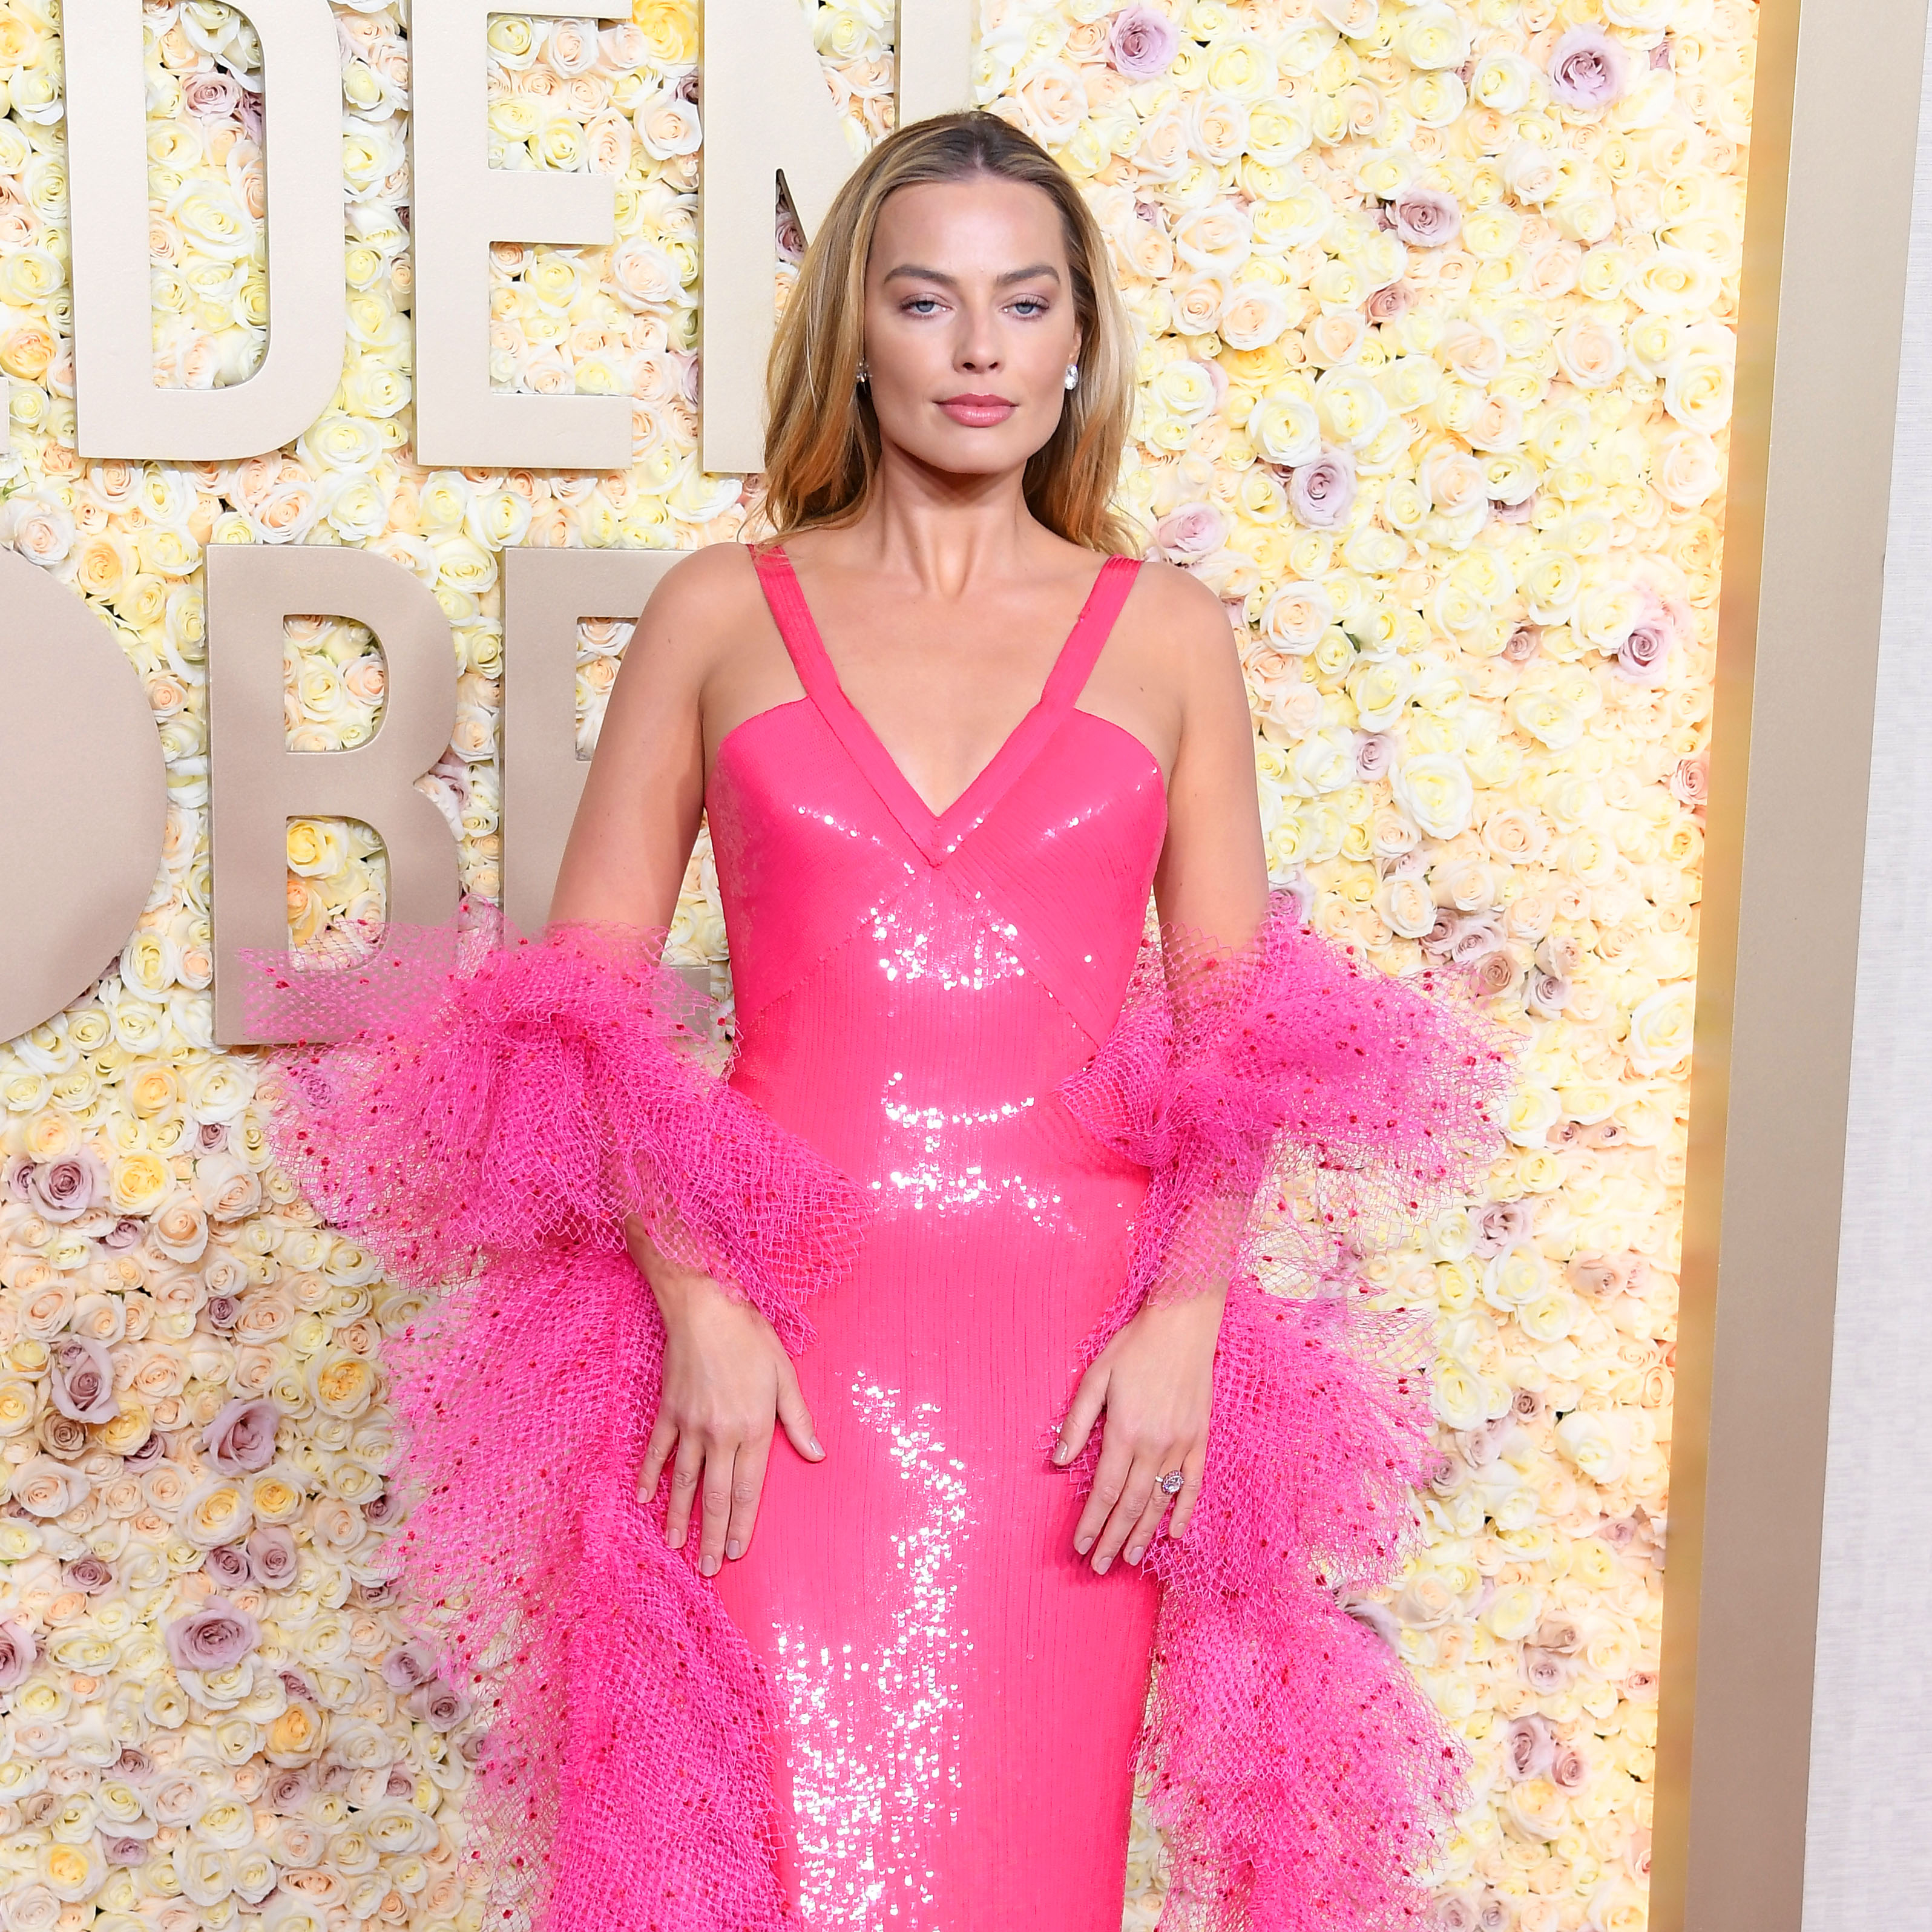  There's a story behind Margot Robbie's epic Golden Globes dress 